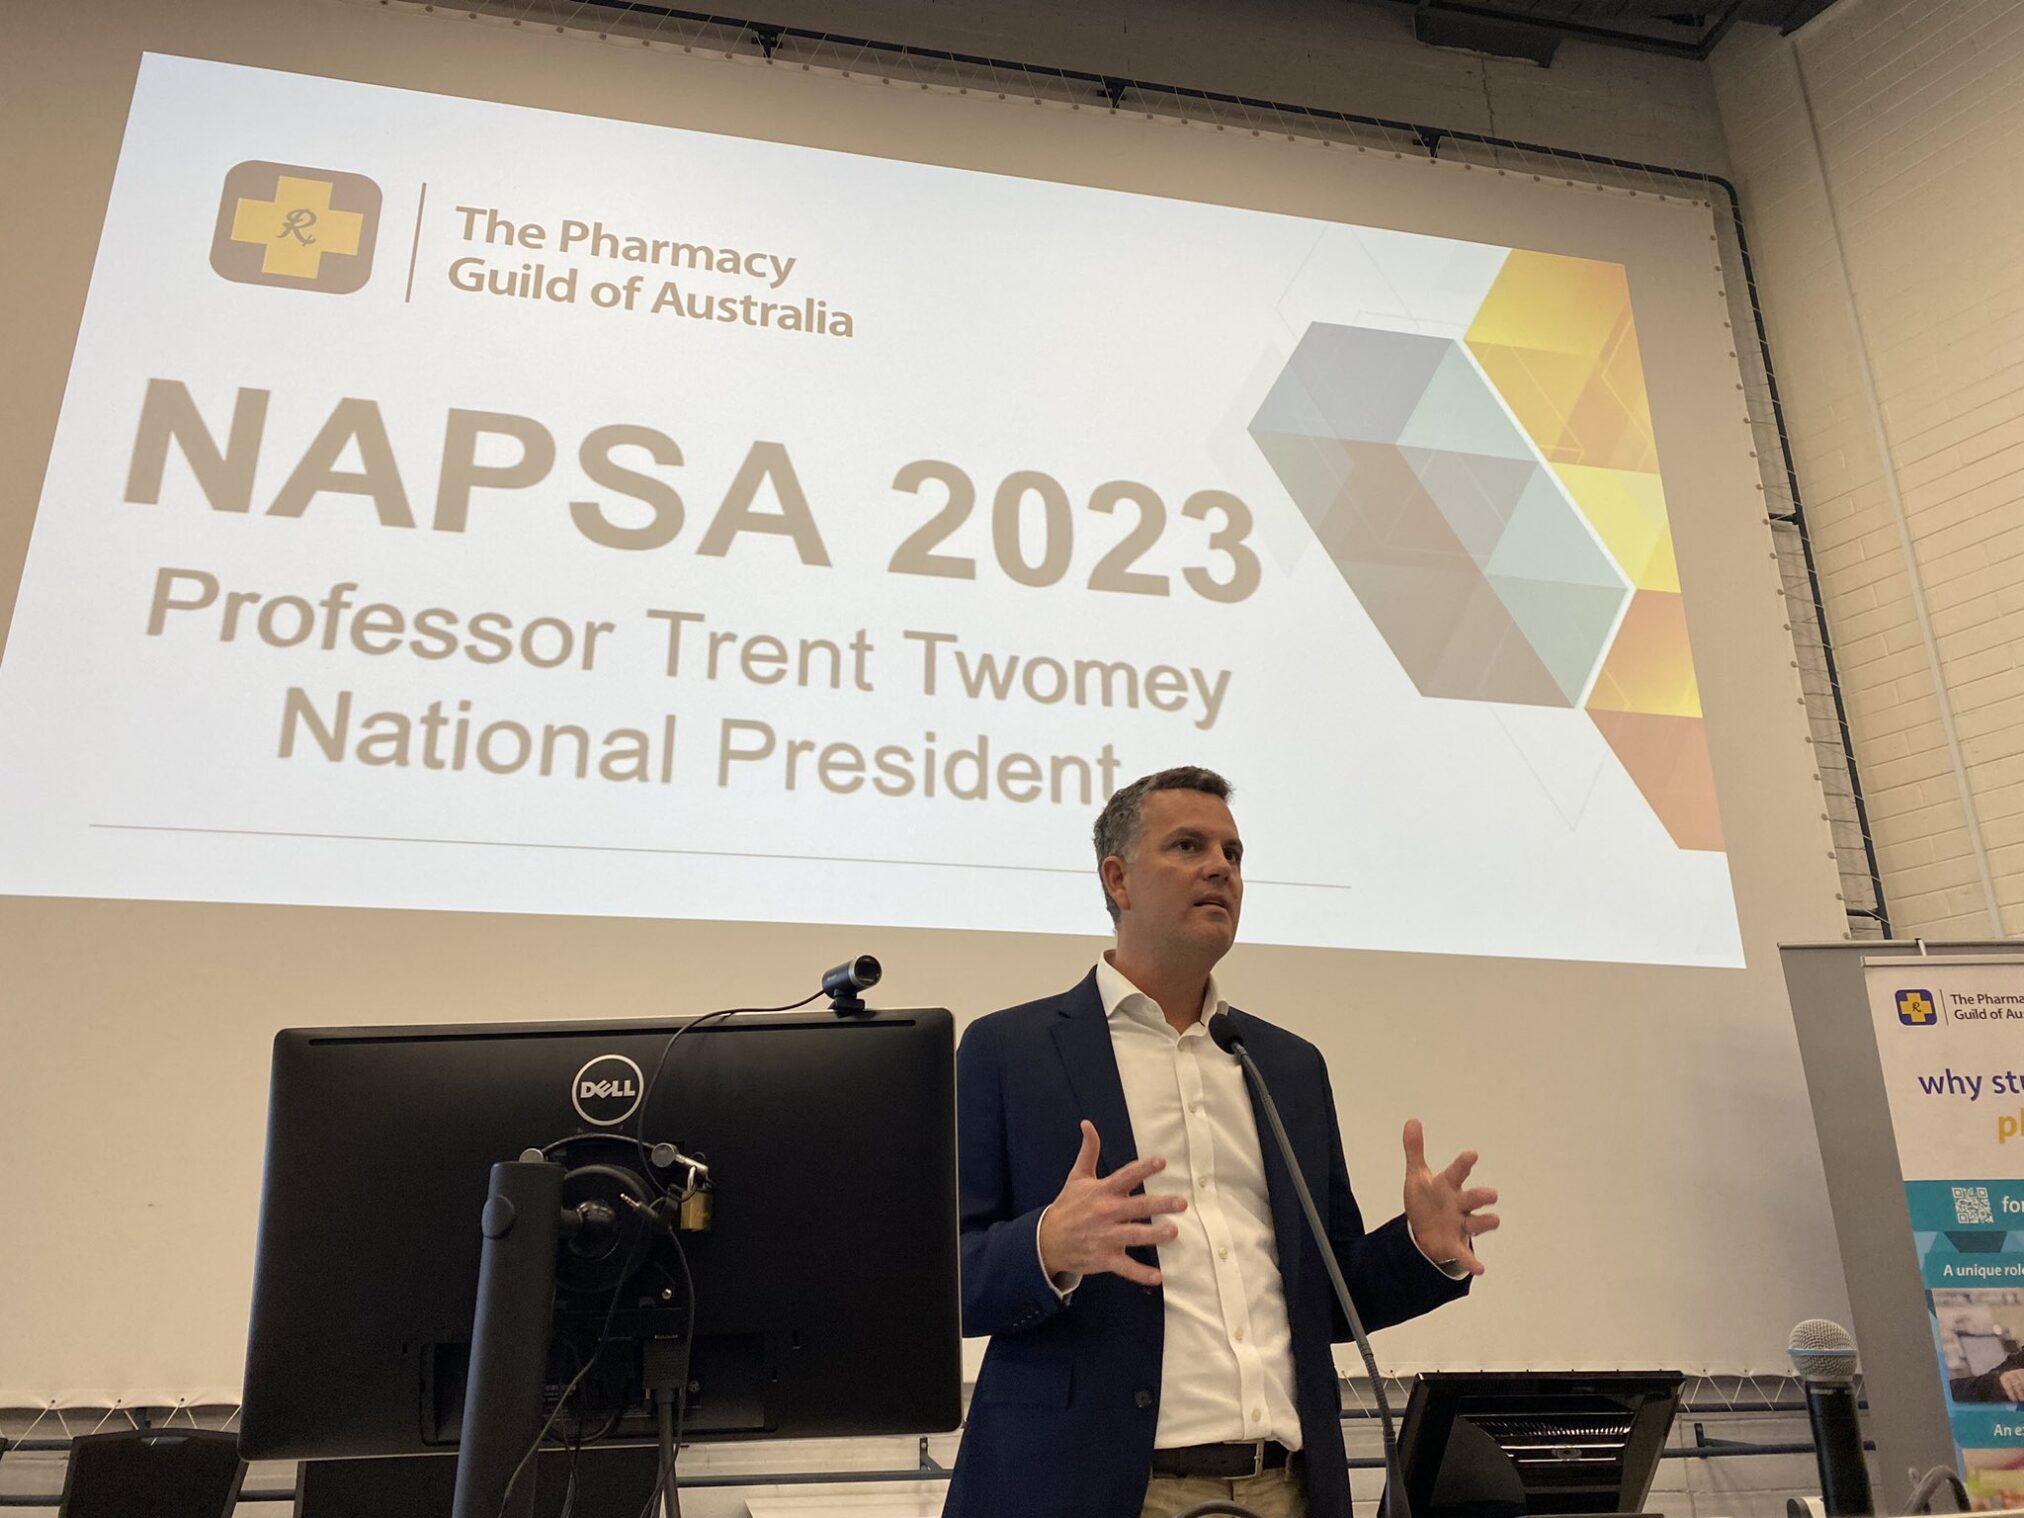 Trent Twomey presents at the NAPSA Congress. Image: Suzanne Greenwood via Twitter.